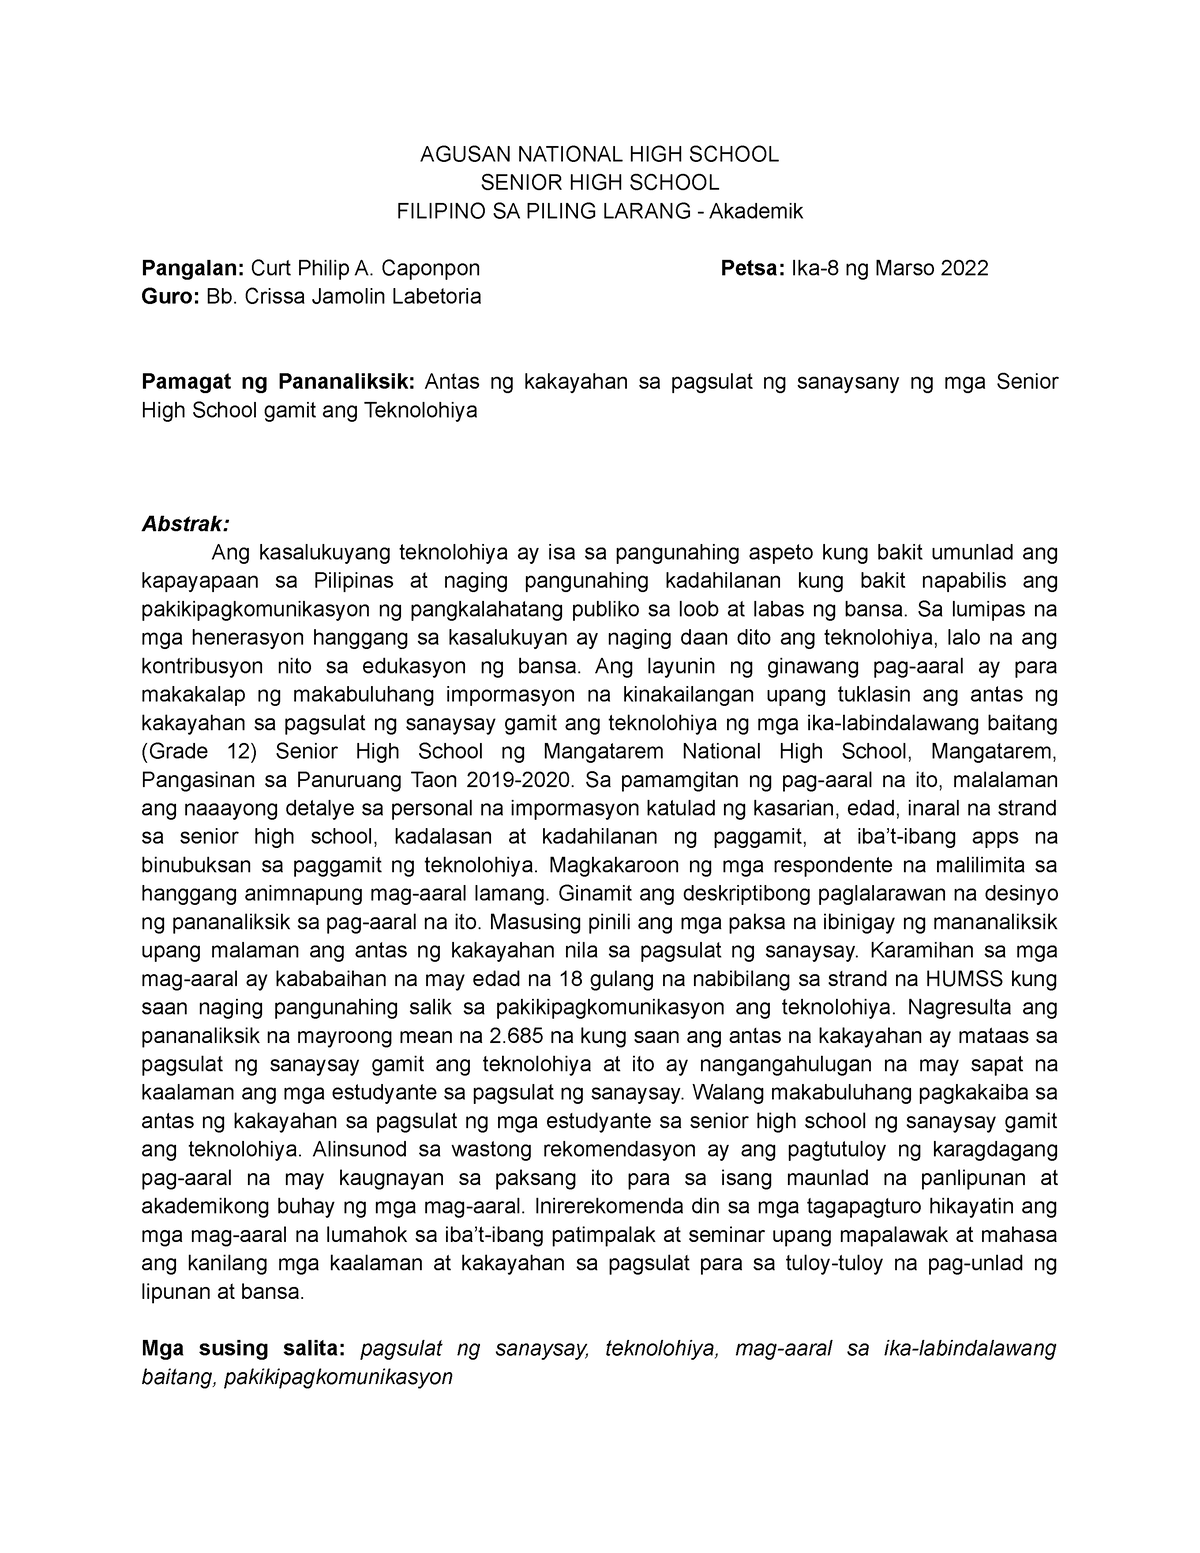 abstract meaning in research tagalog